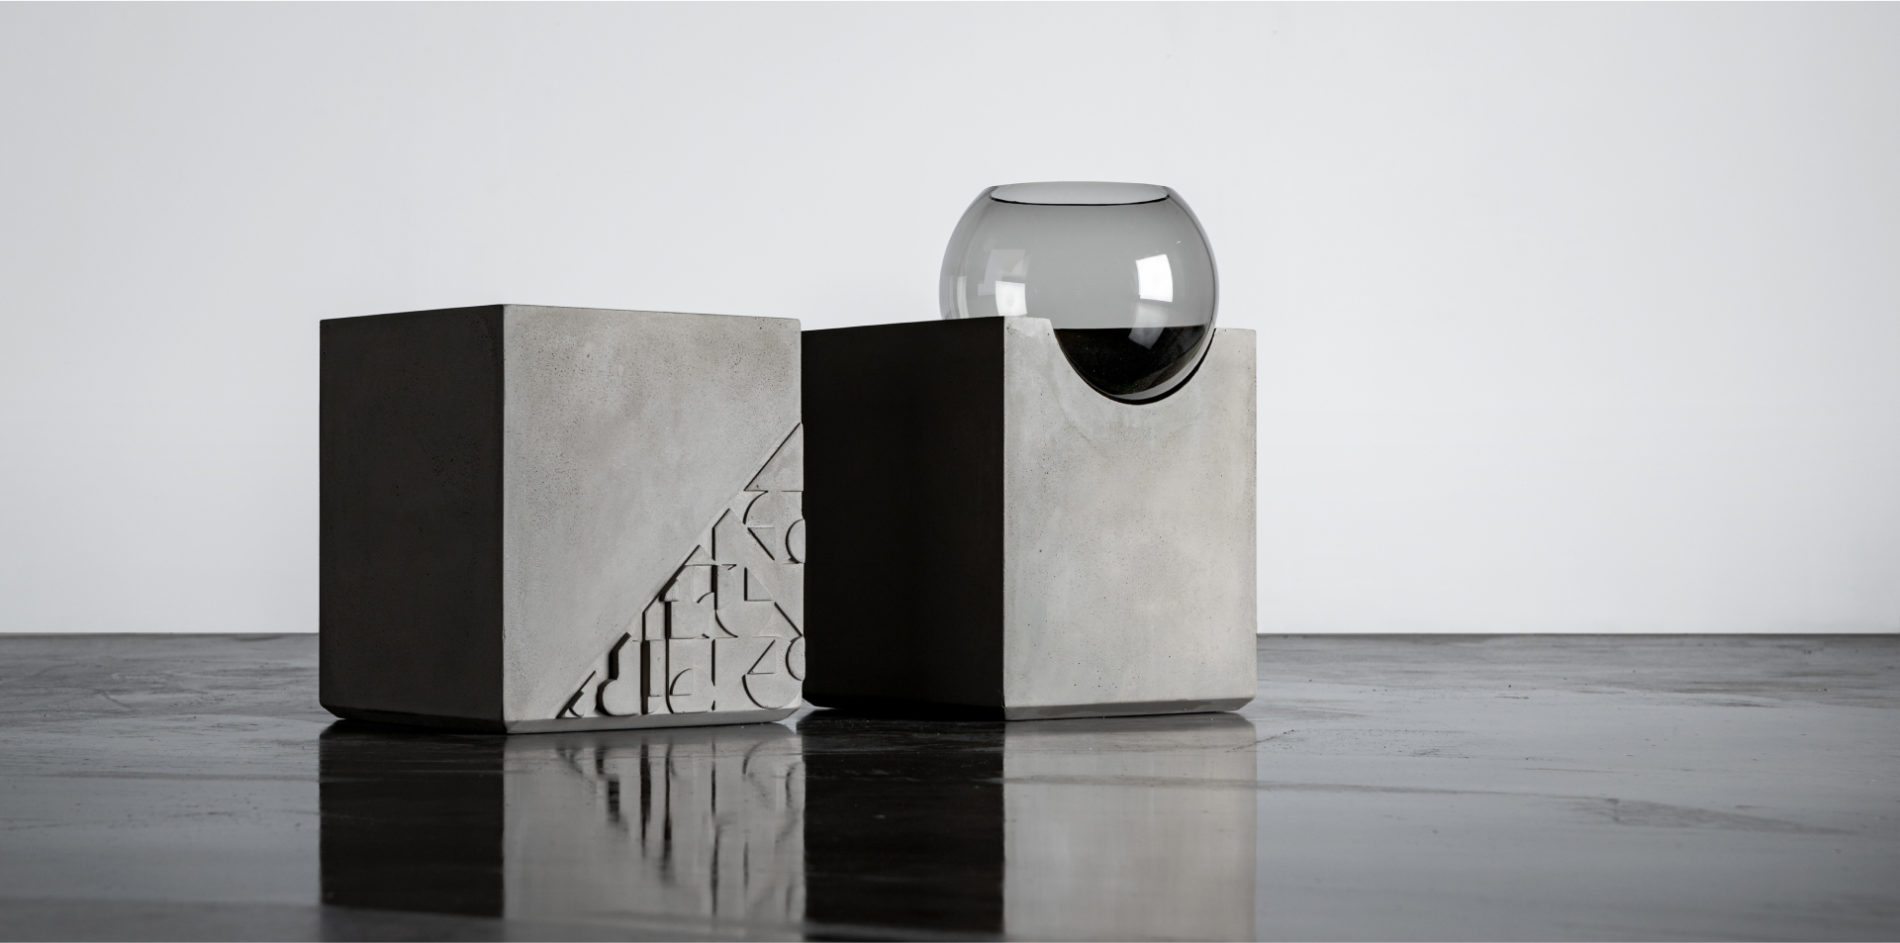 Concrete side table with glass globe